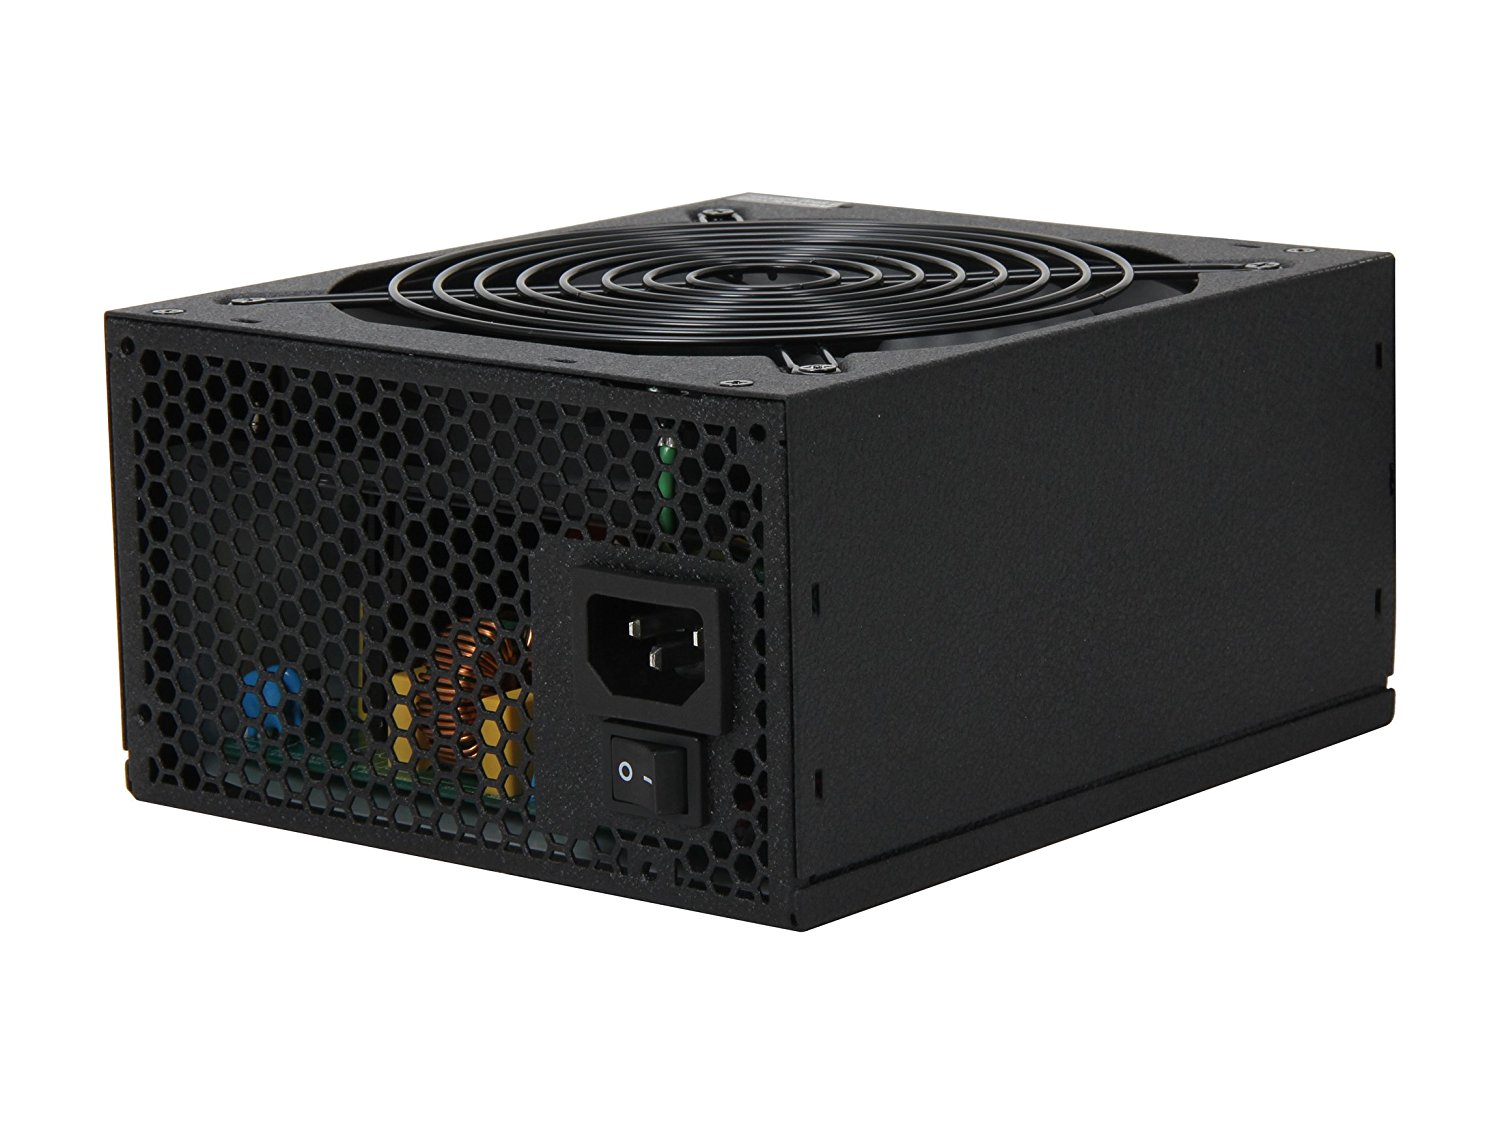 ROSEWILL Gaming 80 Plus Gold 750W Power Supply / PSU, CAPSTONE Series 750 Watt 80 PLUS Gold Certified PSU with Silent 135mm Fan and Auto Fan Speed Control, 7 Year Warranty